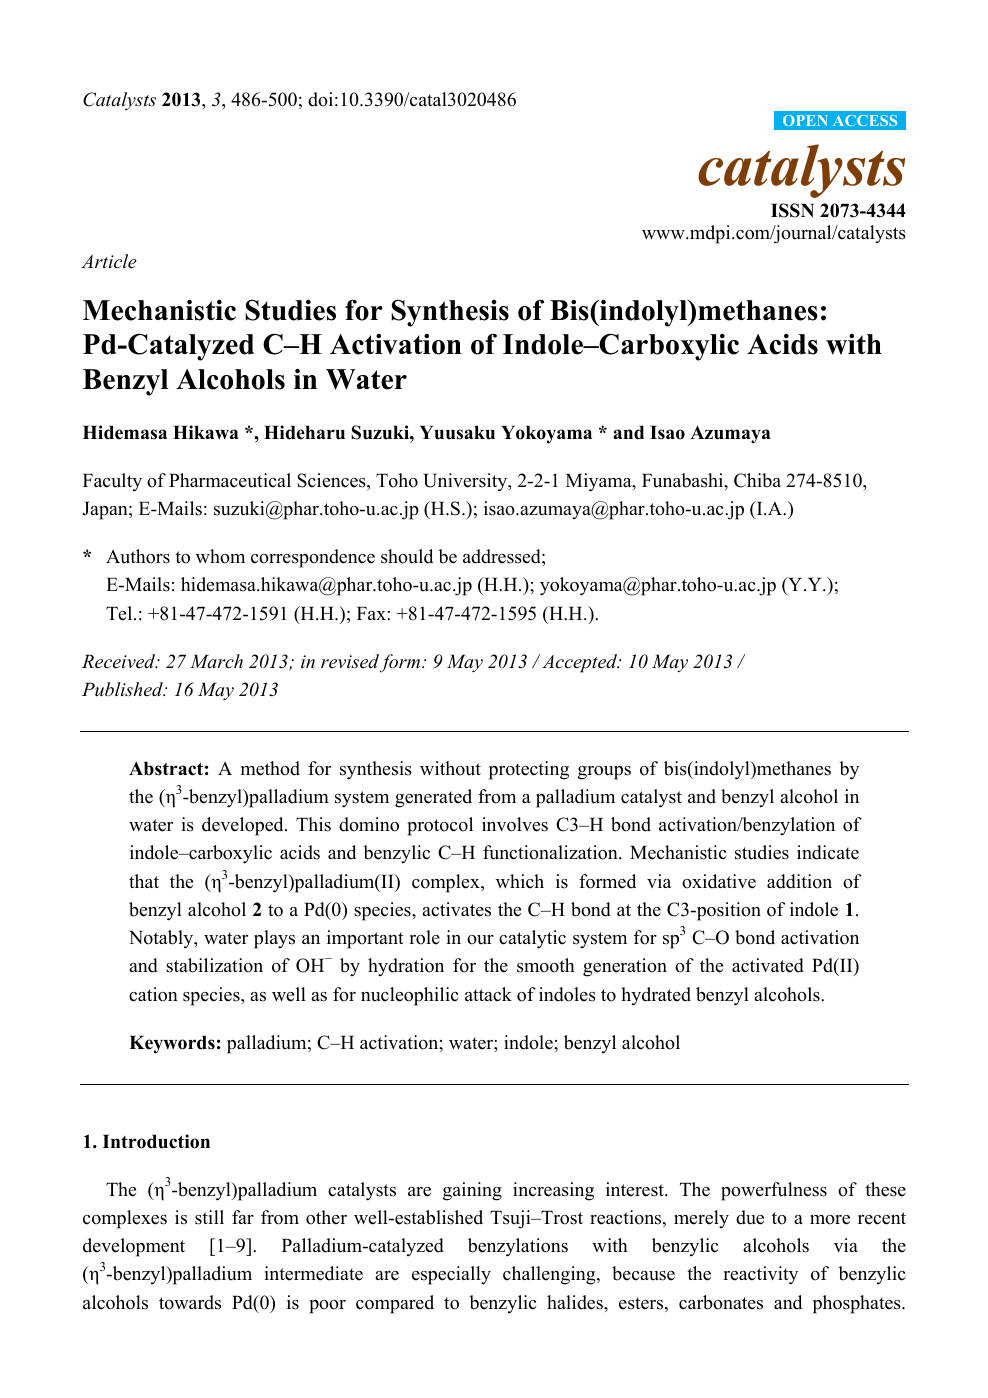 Mechanistic Studies For Synthesis Of Bis Indolyl Methanes Pd Catalyzed C H Activation Of Indole Carboxylic Acids With Benzyl Alcohols In Water Topic Of Research Paper In Chemical Sciences Download Scholarly Article Pdf And Read For